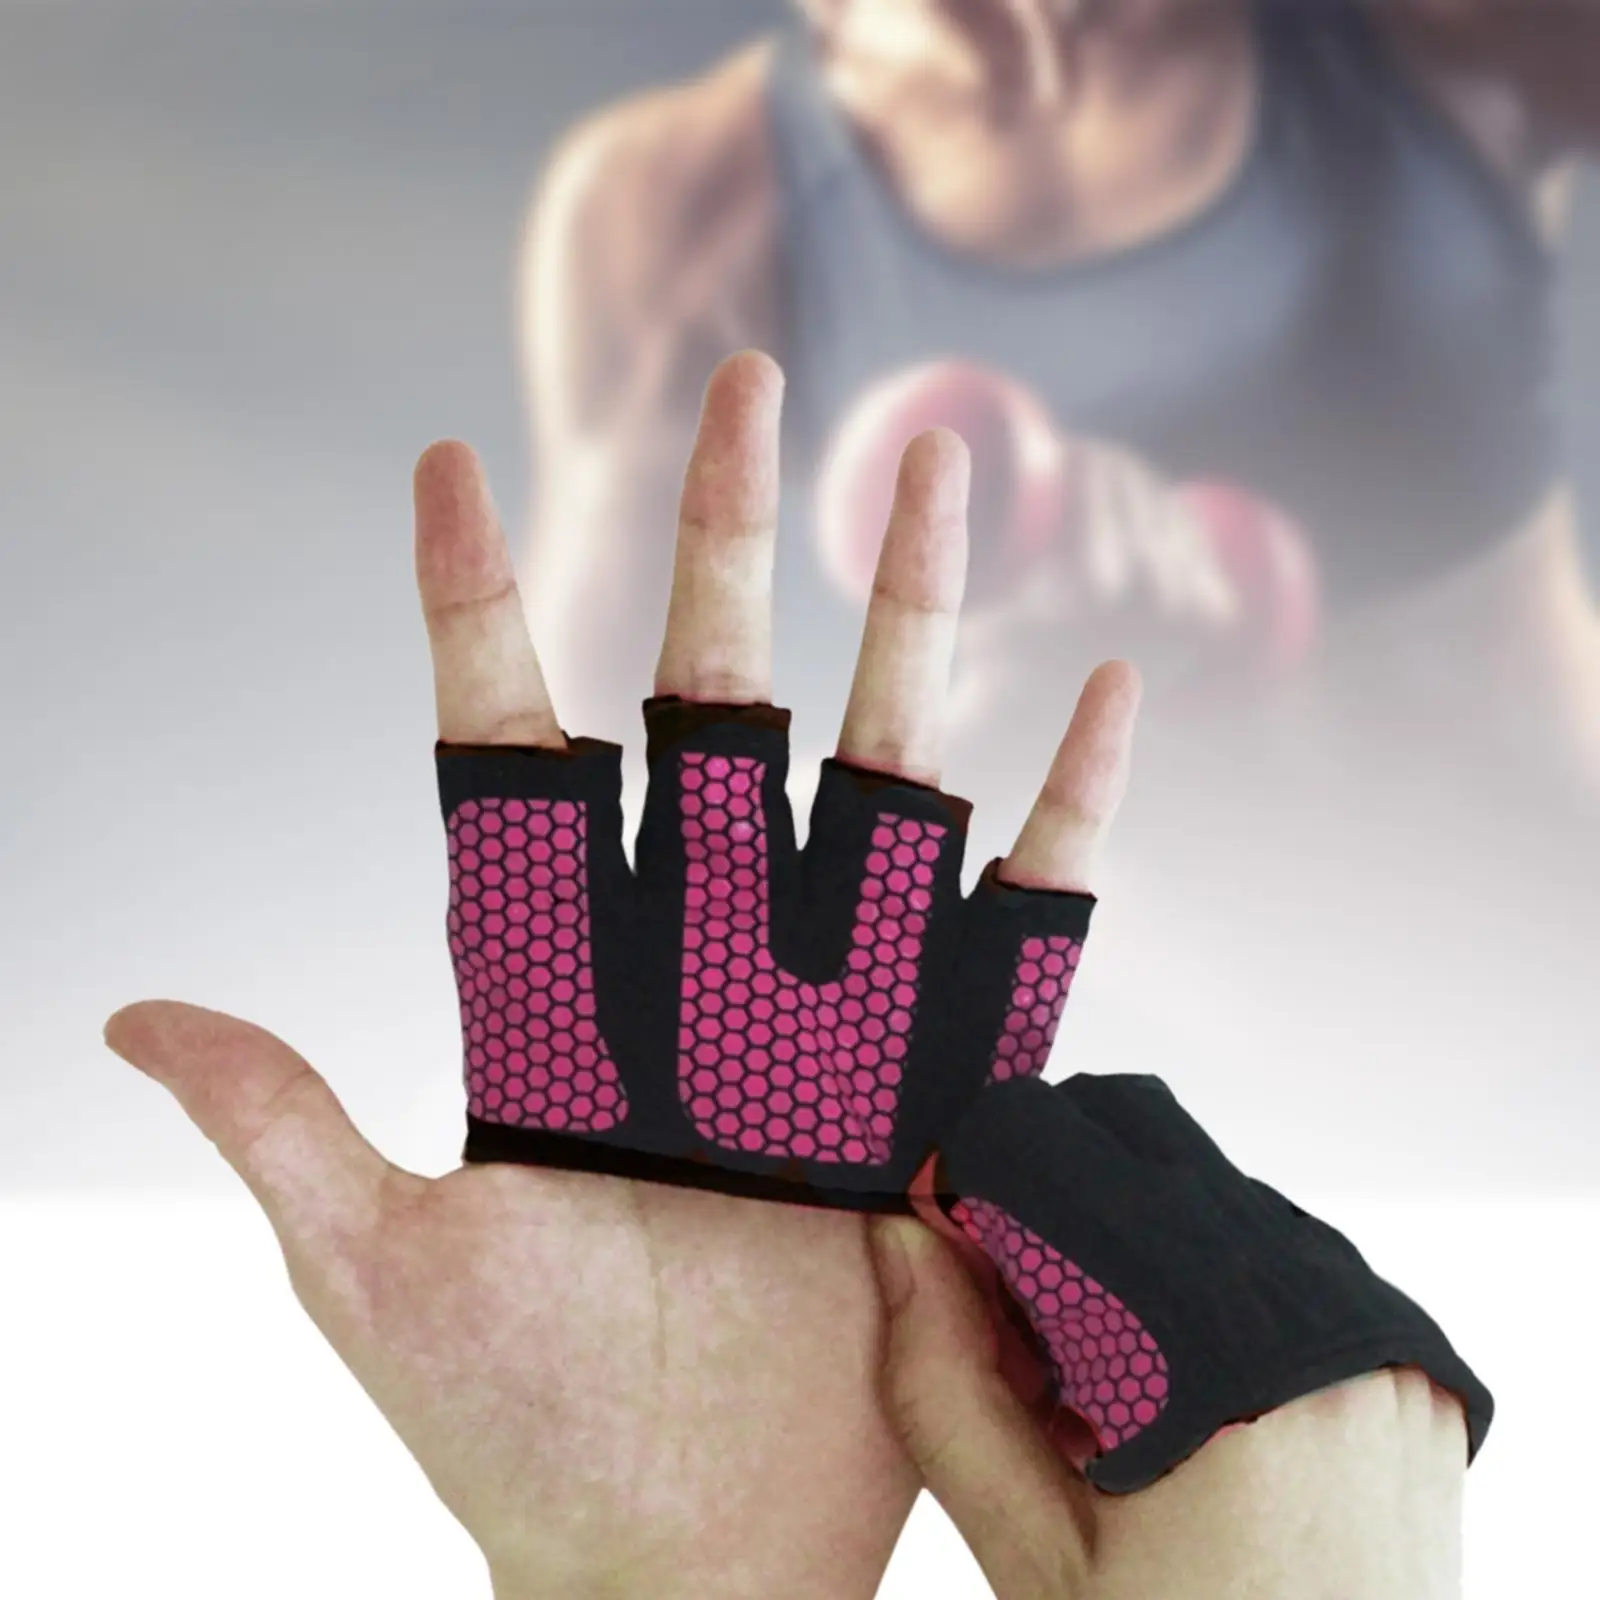 2Pcs Half Finger Workout Gloves Fitness Gloves Weight Lifting Gloves Palm Protection Half Hand Gloves for Exercise Training Gym